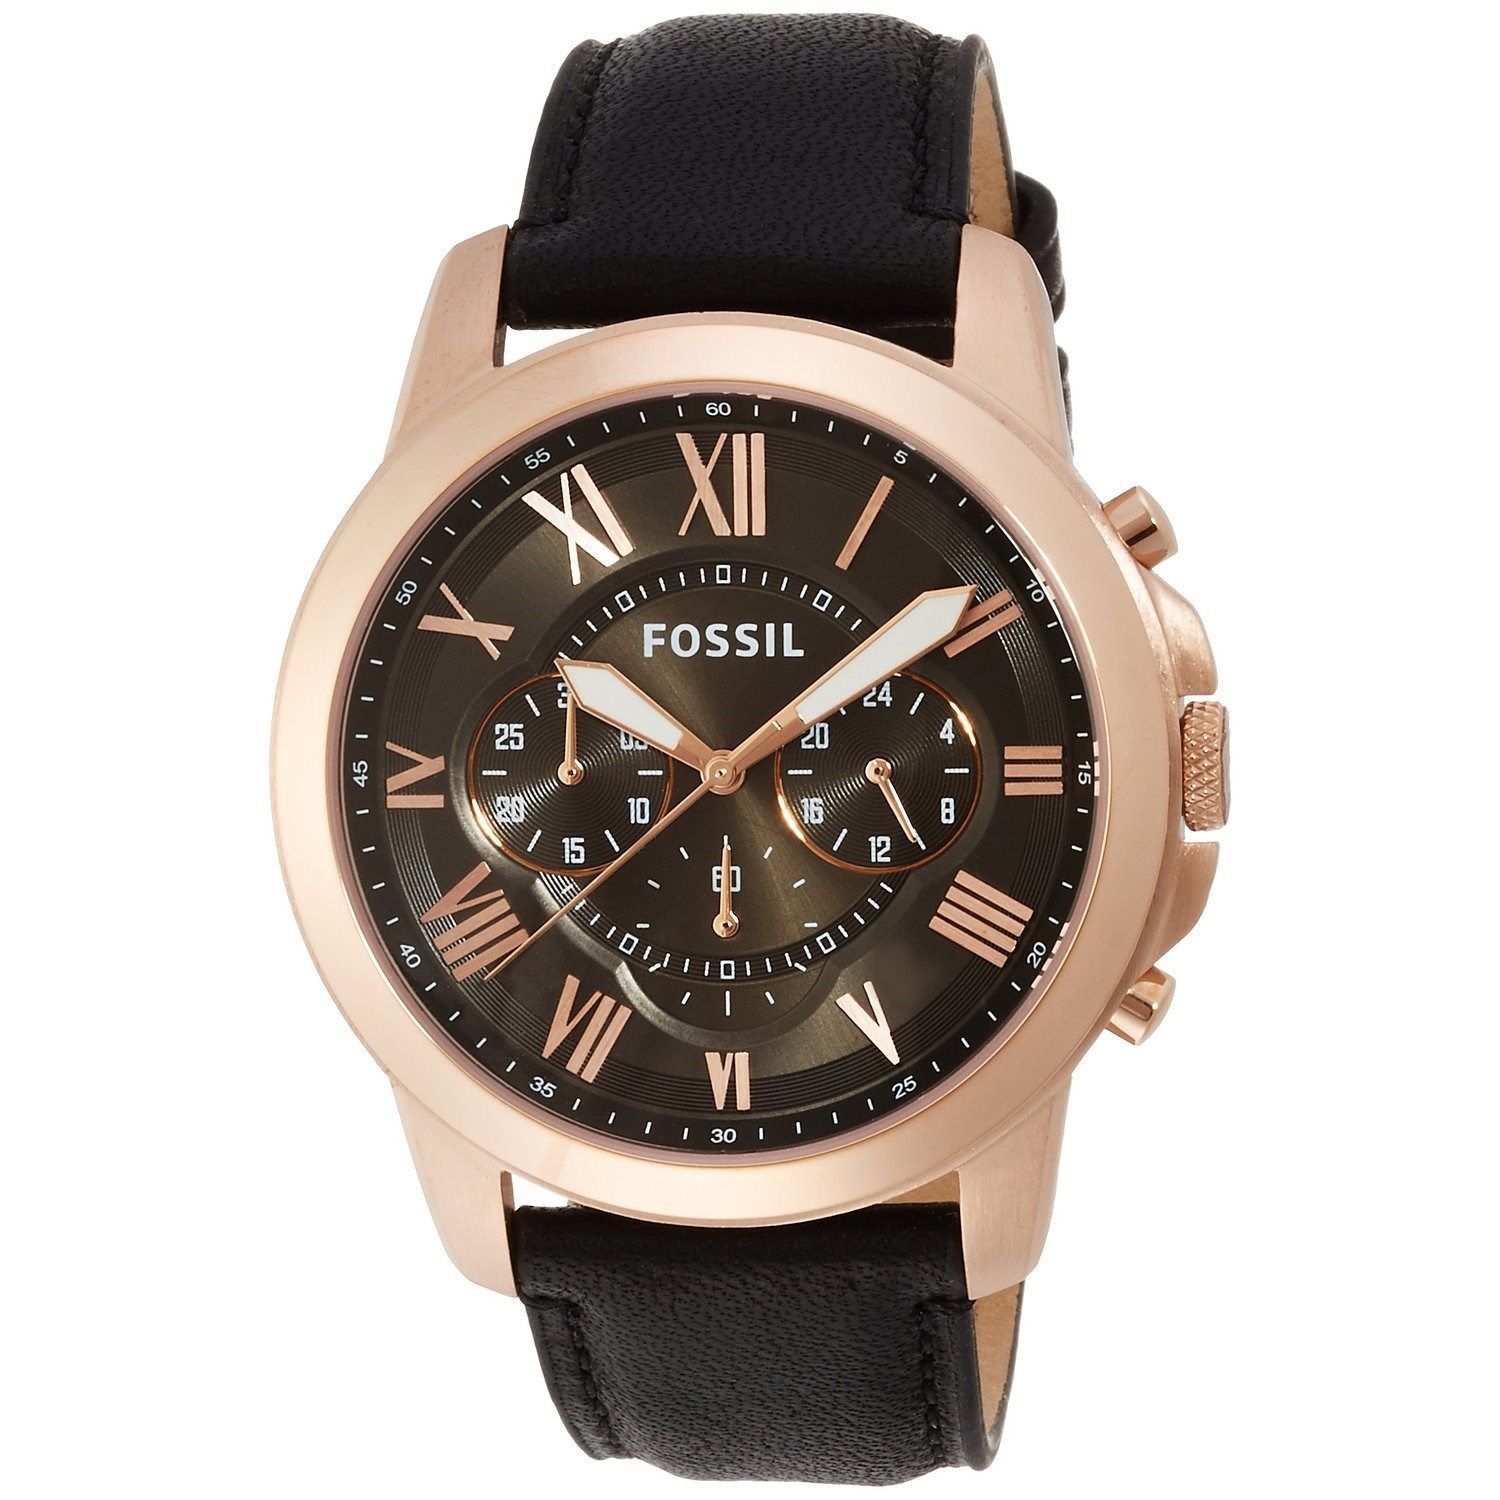 Fossil FS5085 Leather Chronograph Men's Watch - Buy Fossil FS5085 Leather Chronograph Men's 